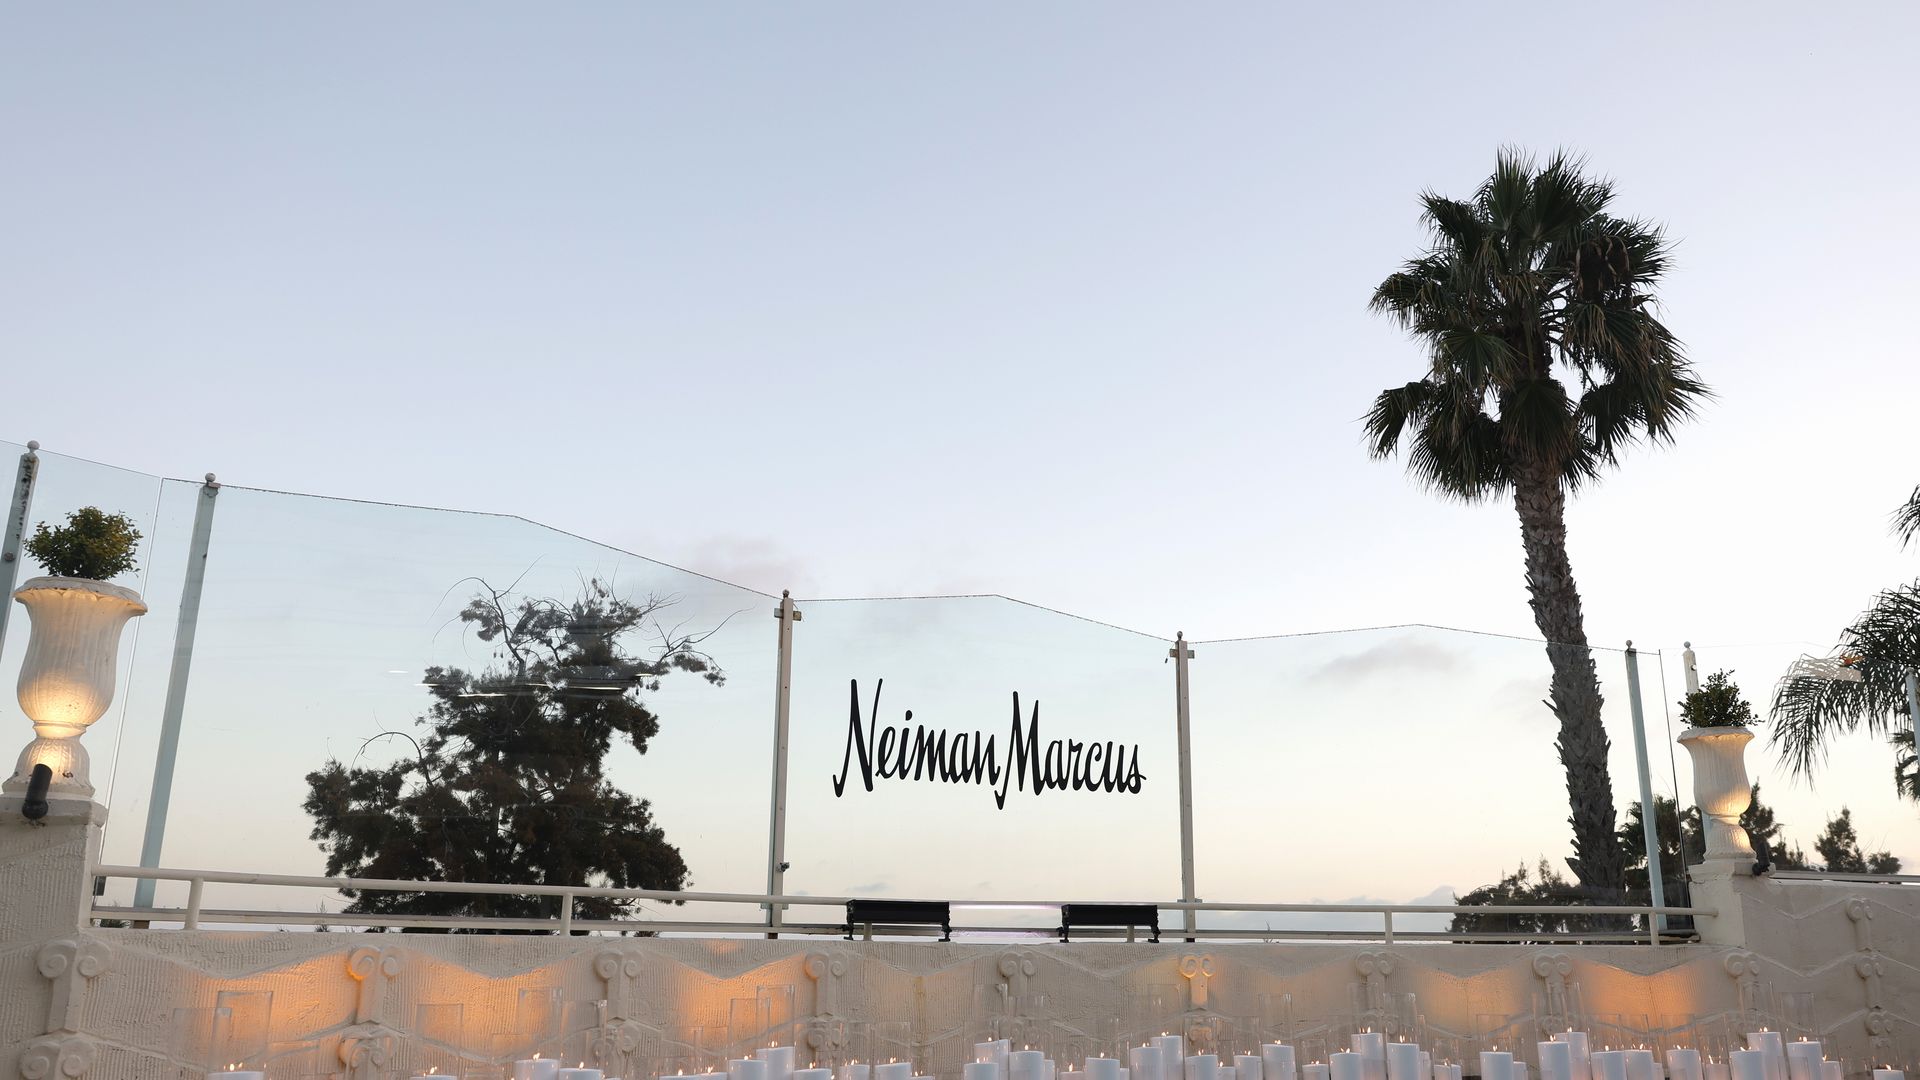 Image of Neiman Marcus logo on a raised outdoor stage